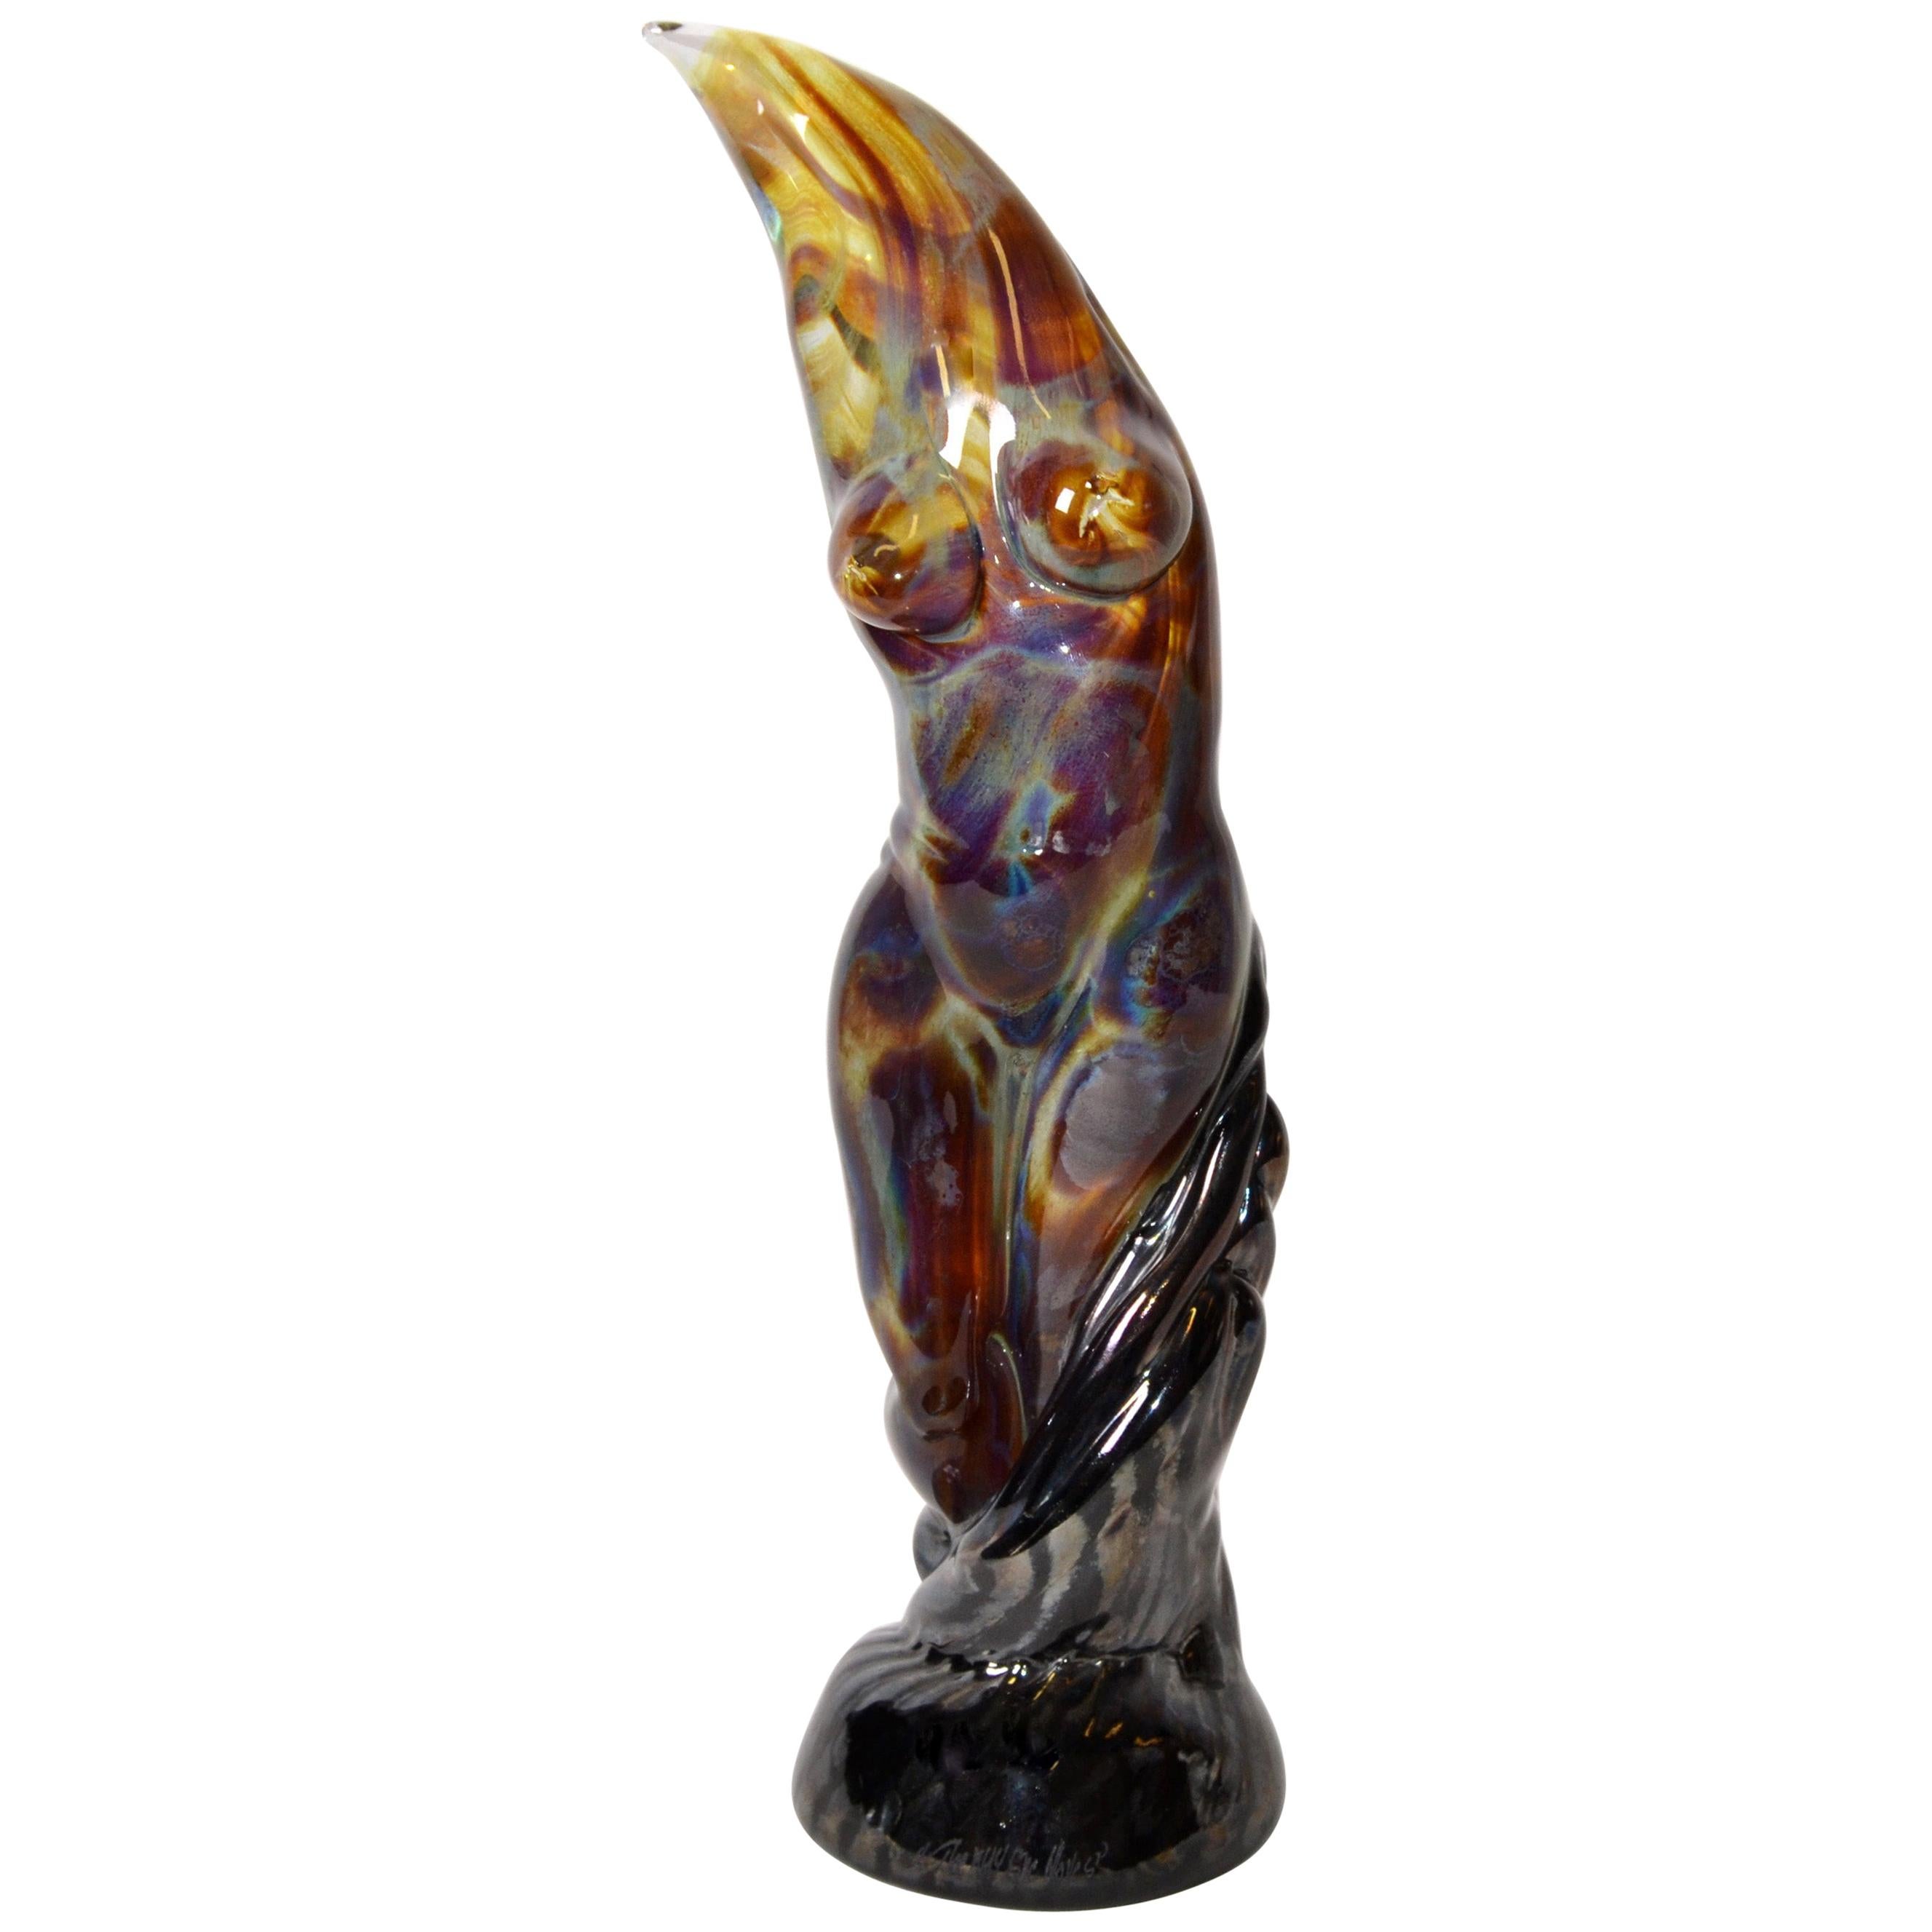 Modern Art Glass Sculpture Nude Woman Titled The Way She Moves Signed Michael For Sale